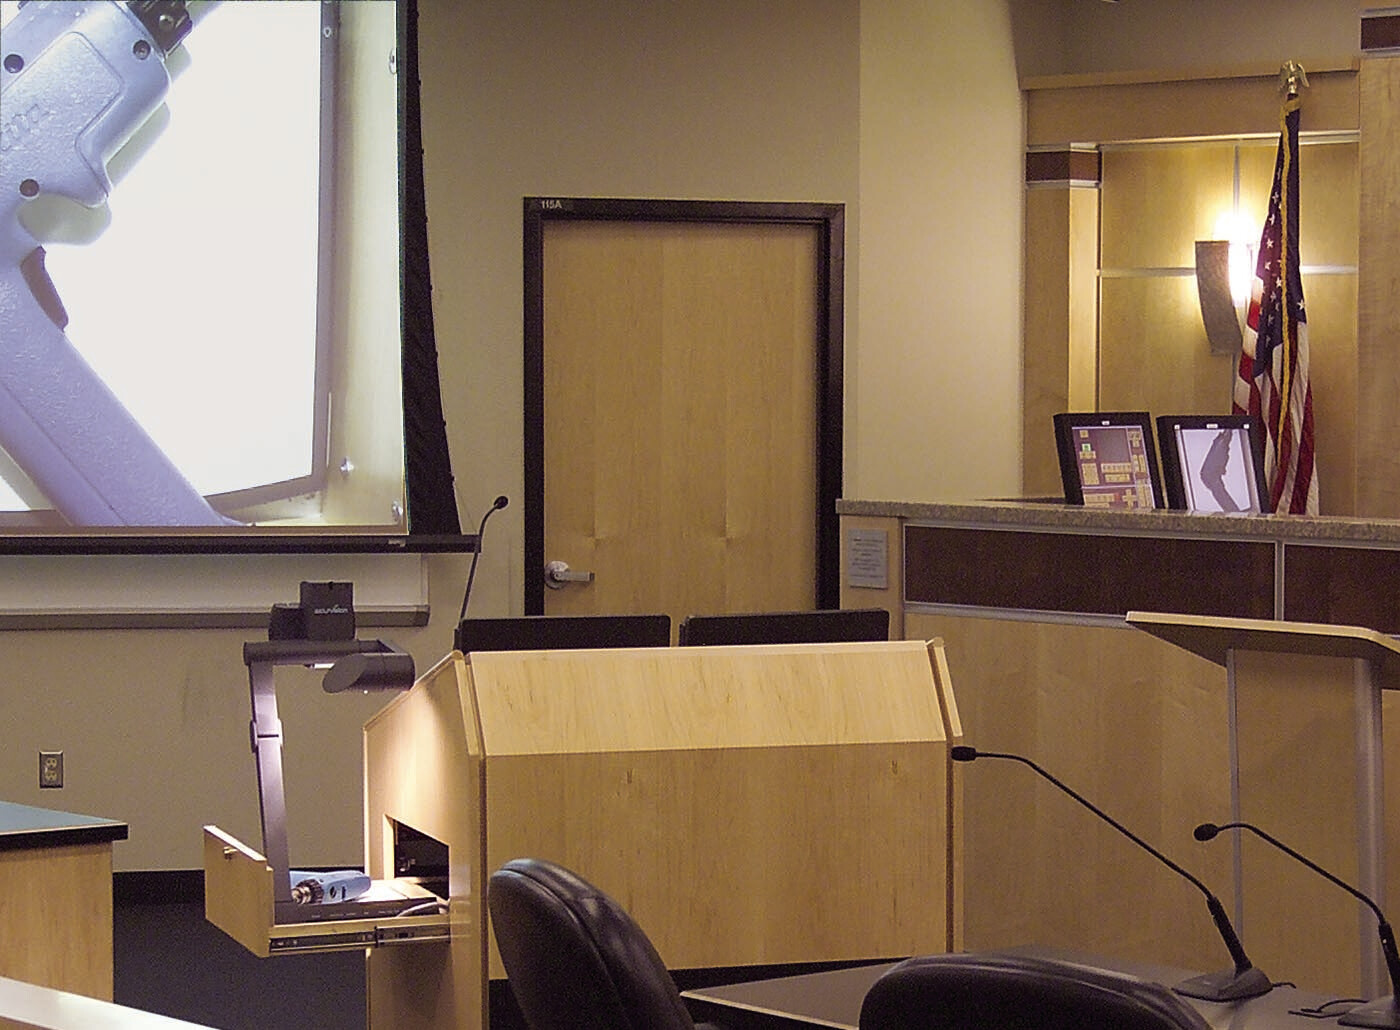 The 21st century courtroom at the Arizona State University College of Law.